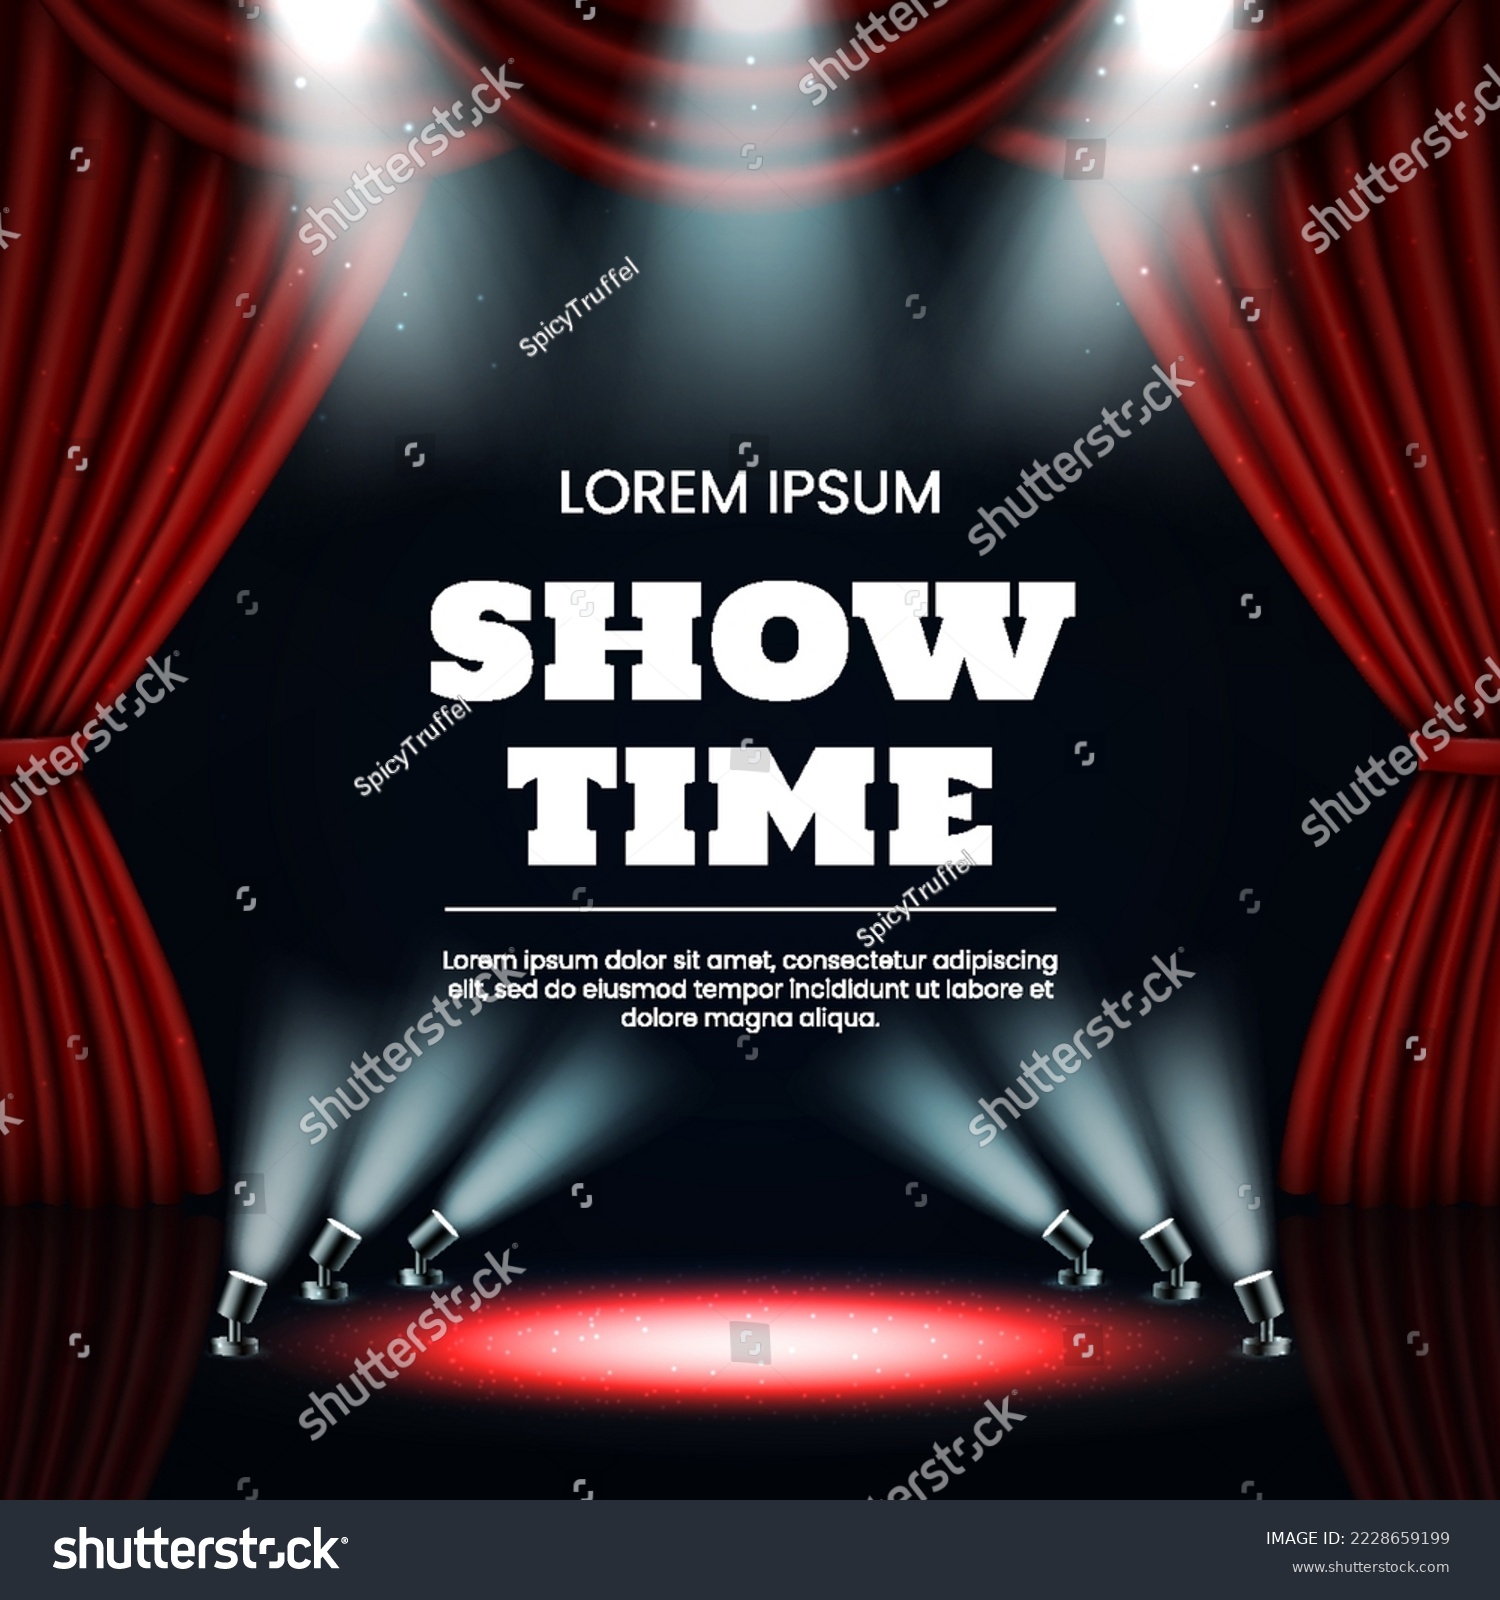 SVG of Broadway theater curtains. Award show. Stage red drapery and spotlights. Movie night or showtime. Casino lights. Cinema event. Illuminated circle. Presentation banner. Vector background svg